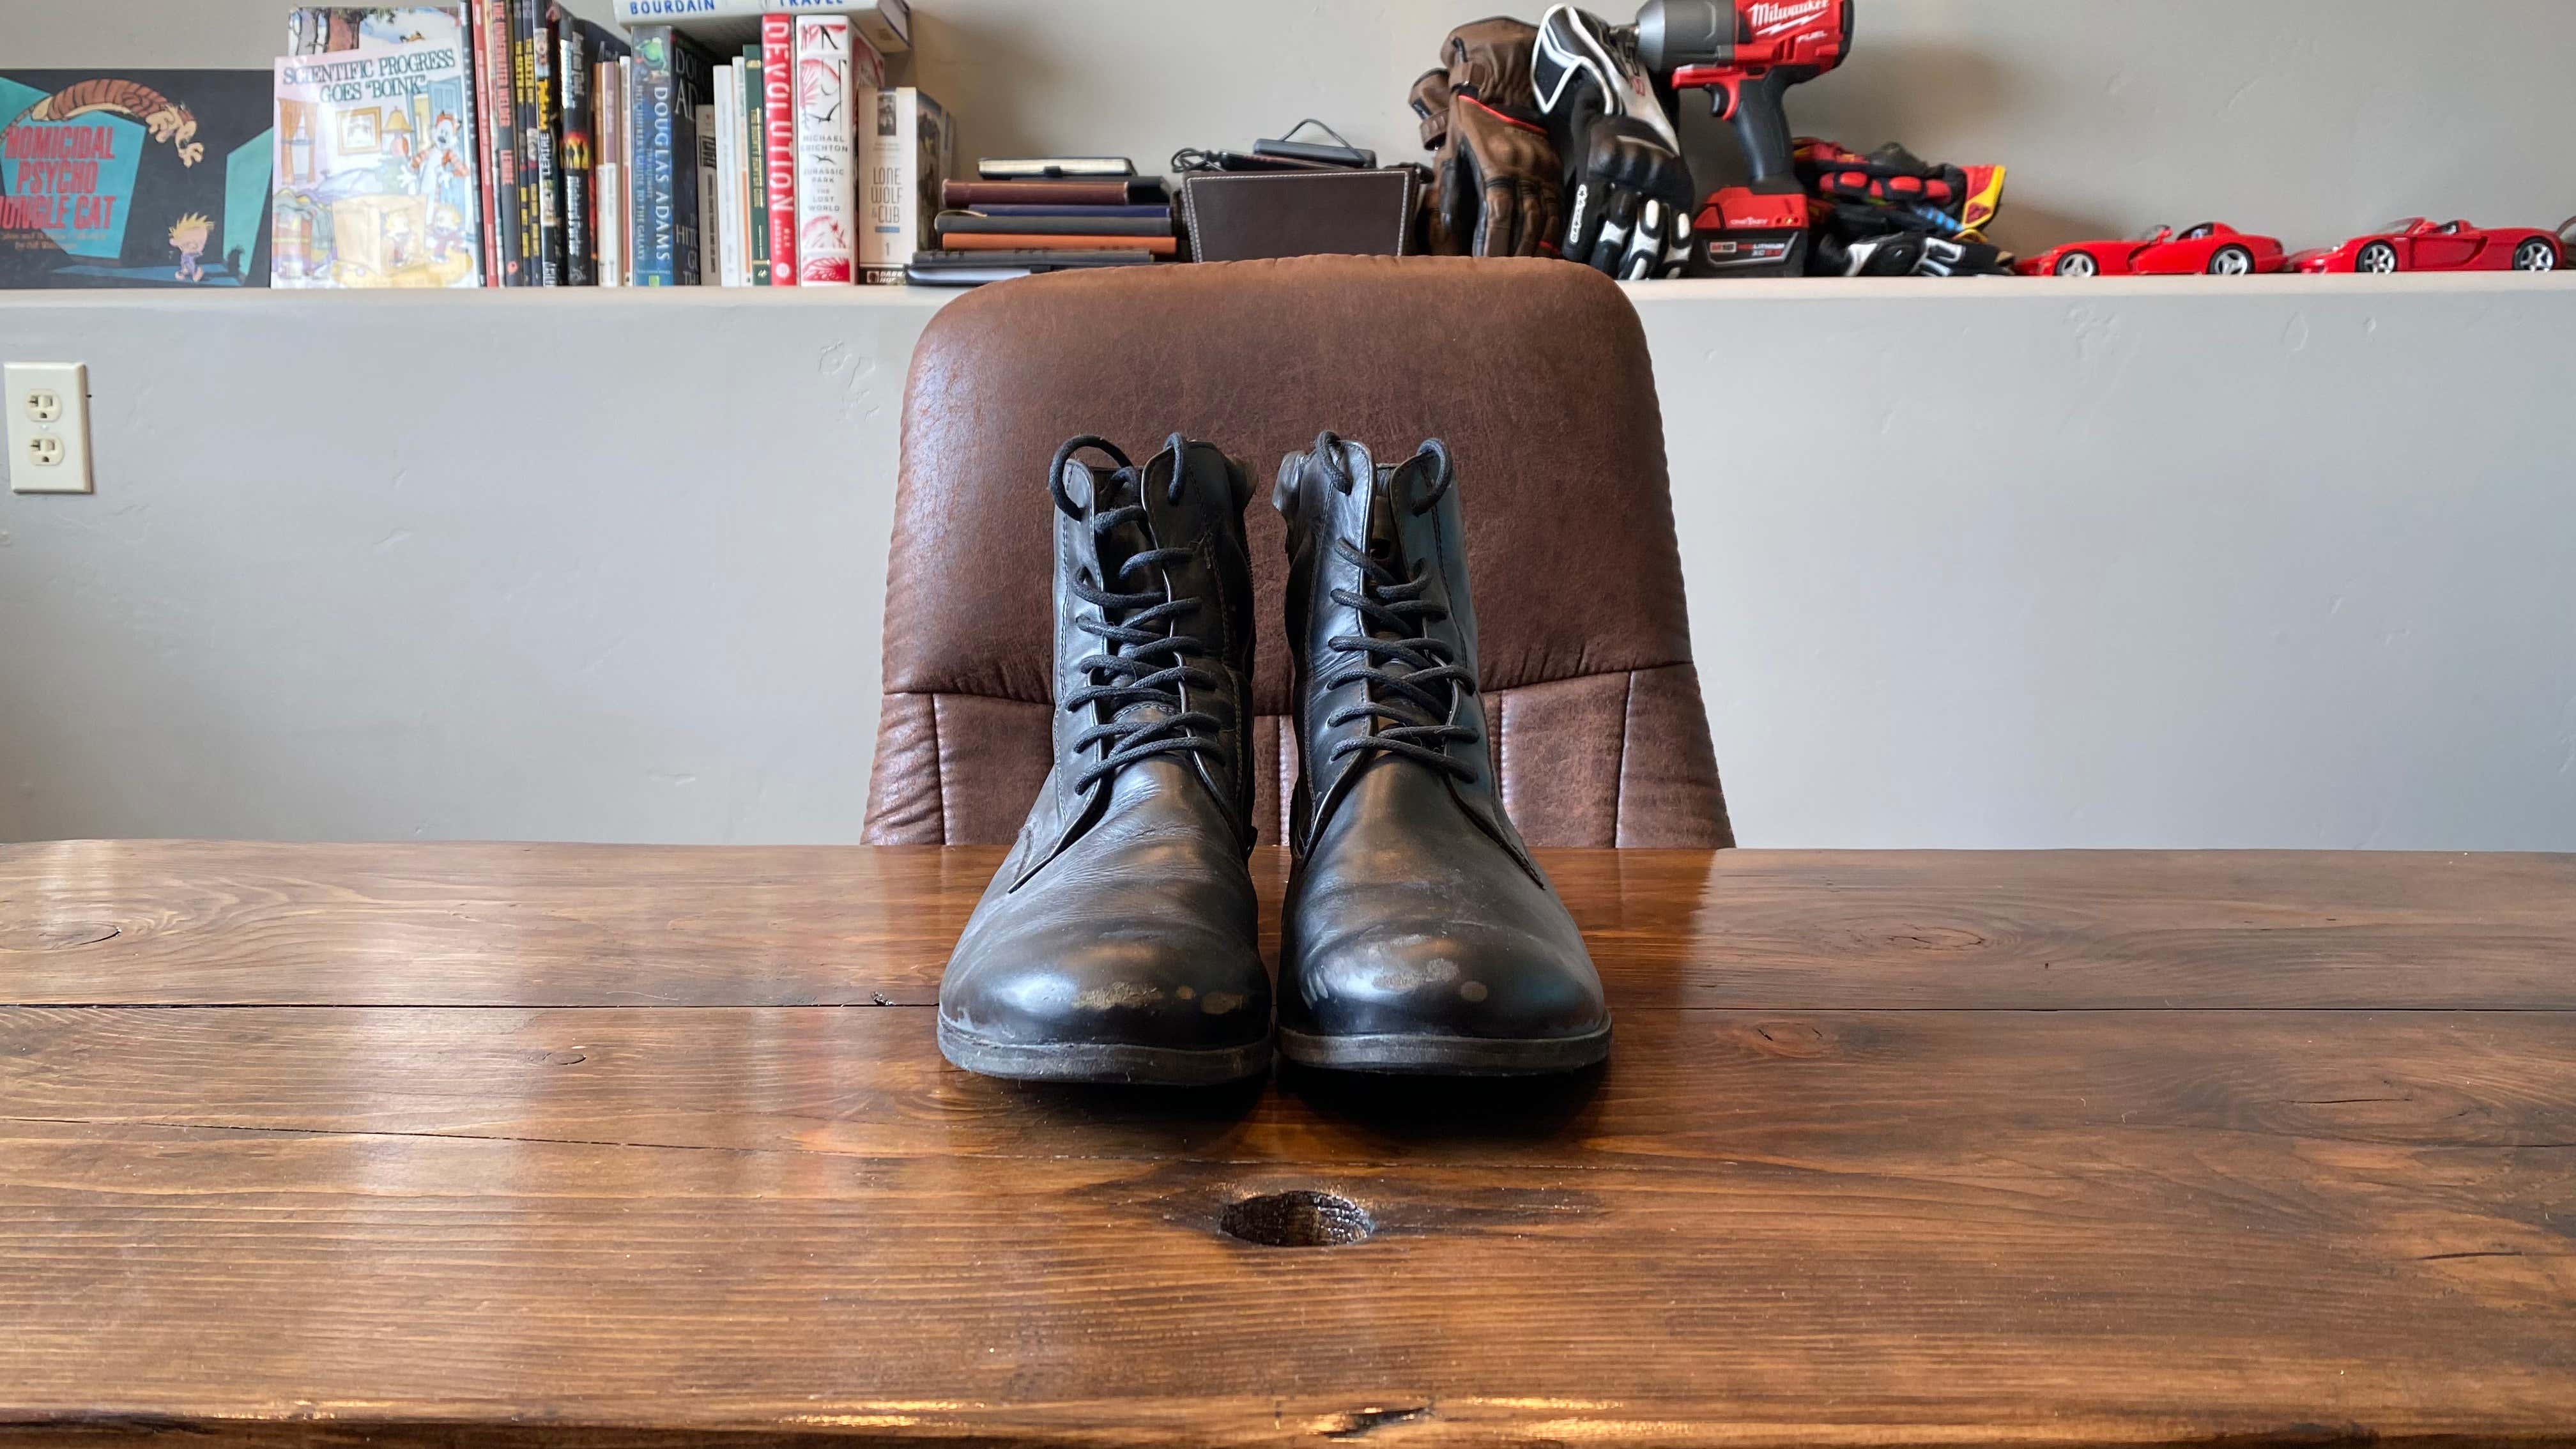 Style motorcycle boots.